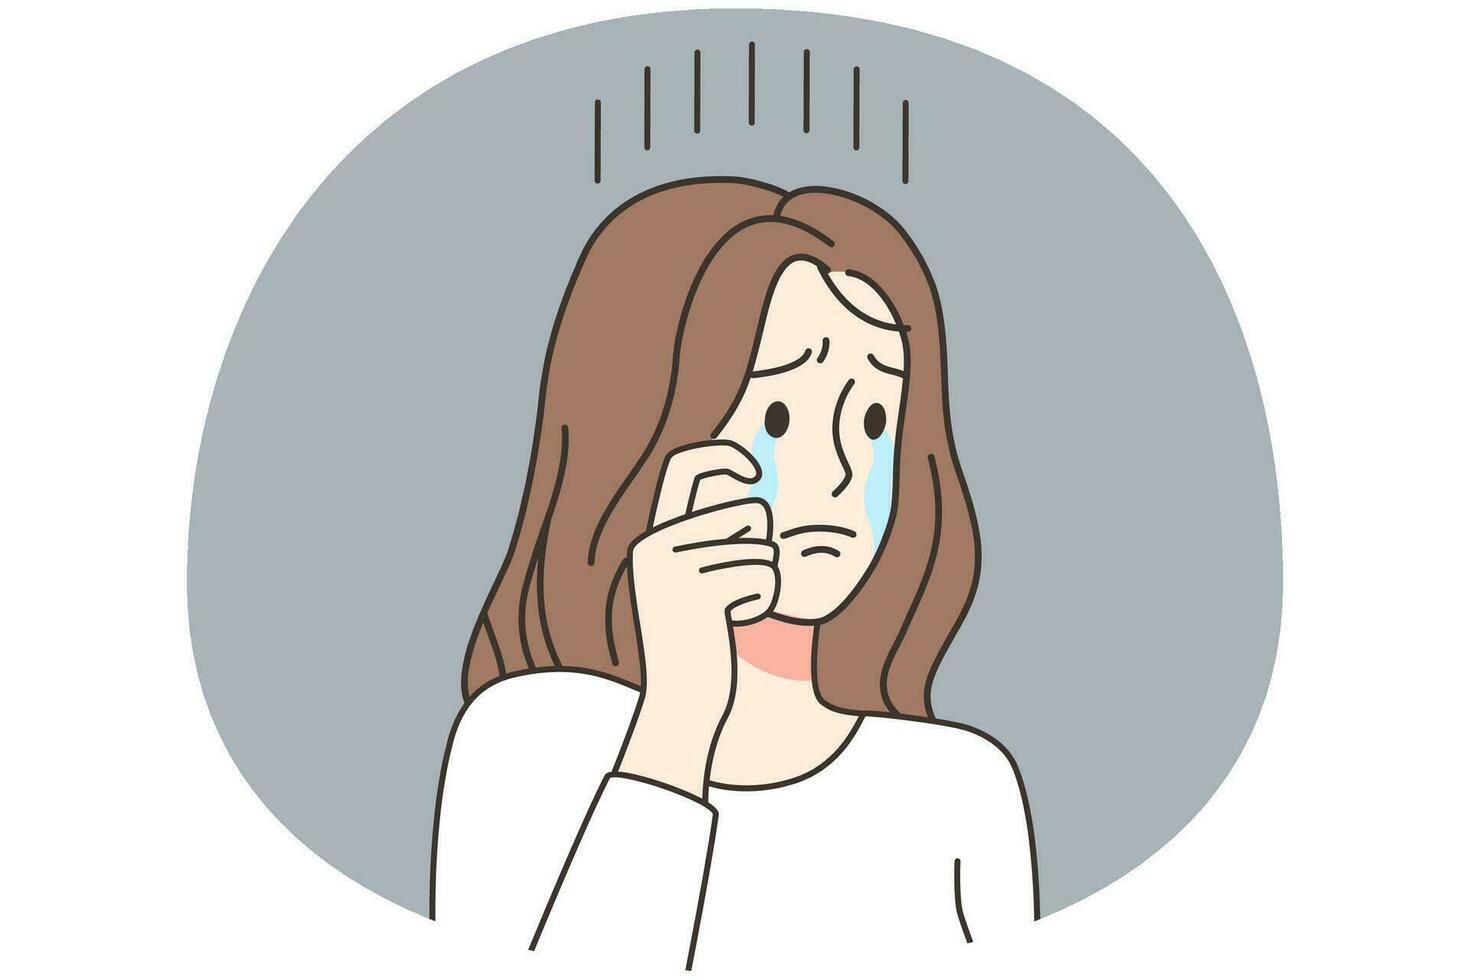 Unhappy young woman feeling down crying. Upset girl distressed with loneliness or solitude. Personal or mental problem. Depression concept. Vector illustration.